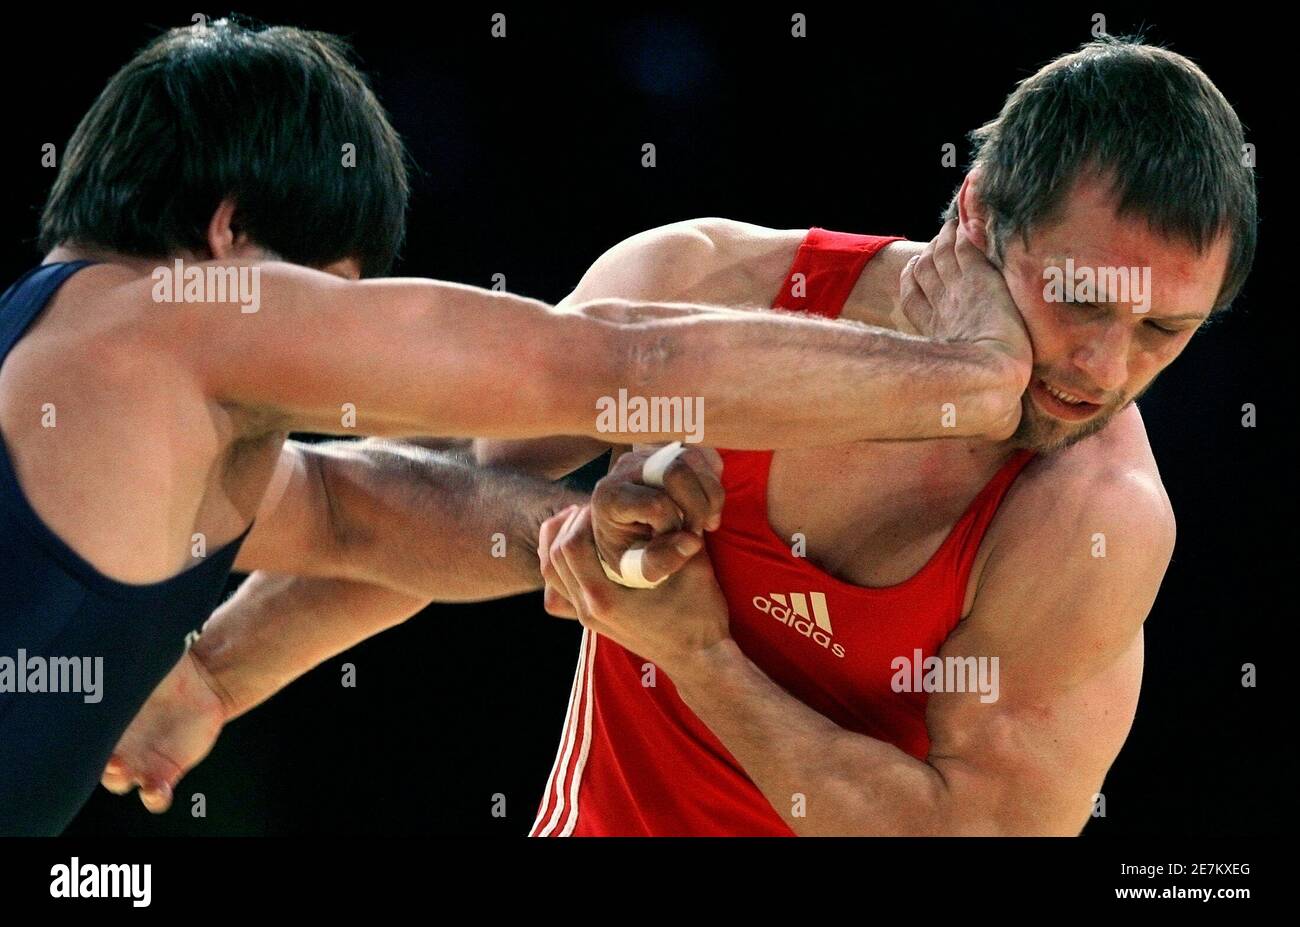 India's Ramesh Kumar (L) challenges Moldova's Alexandr Burca during their  bronze medal in the men's 74 kg free style at the World Wrestling  Championships 2009 in Herning September 23, 2009. REUTERS/Bob Strong (